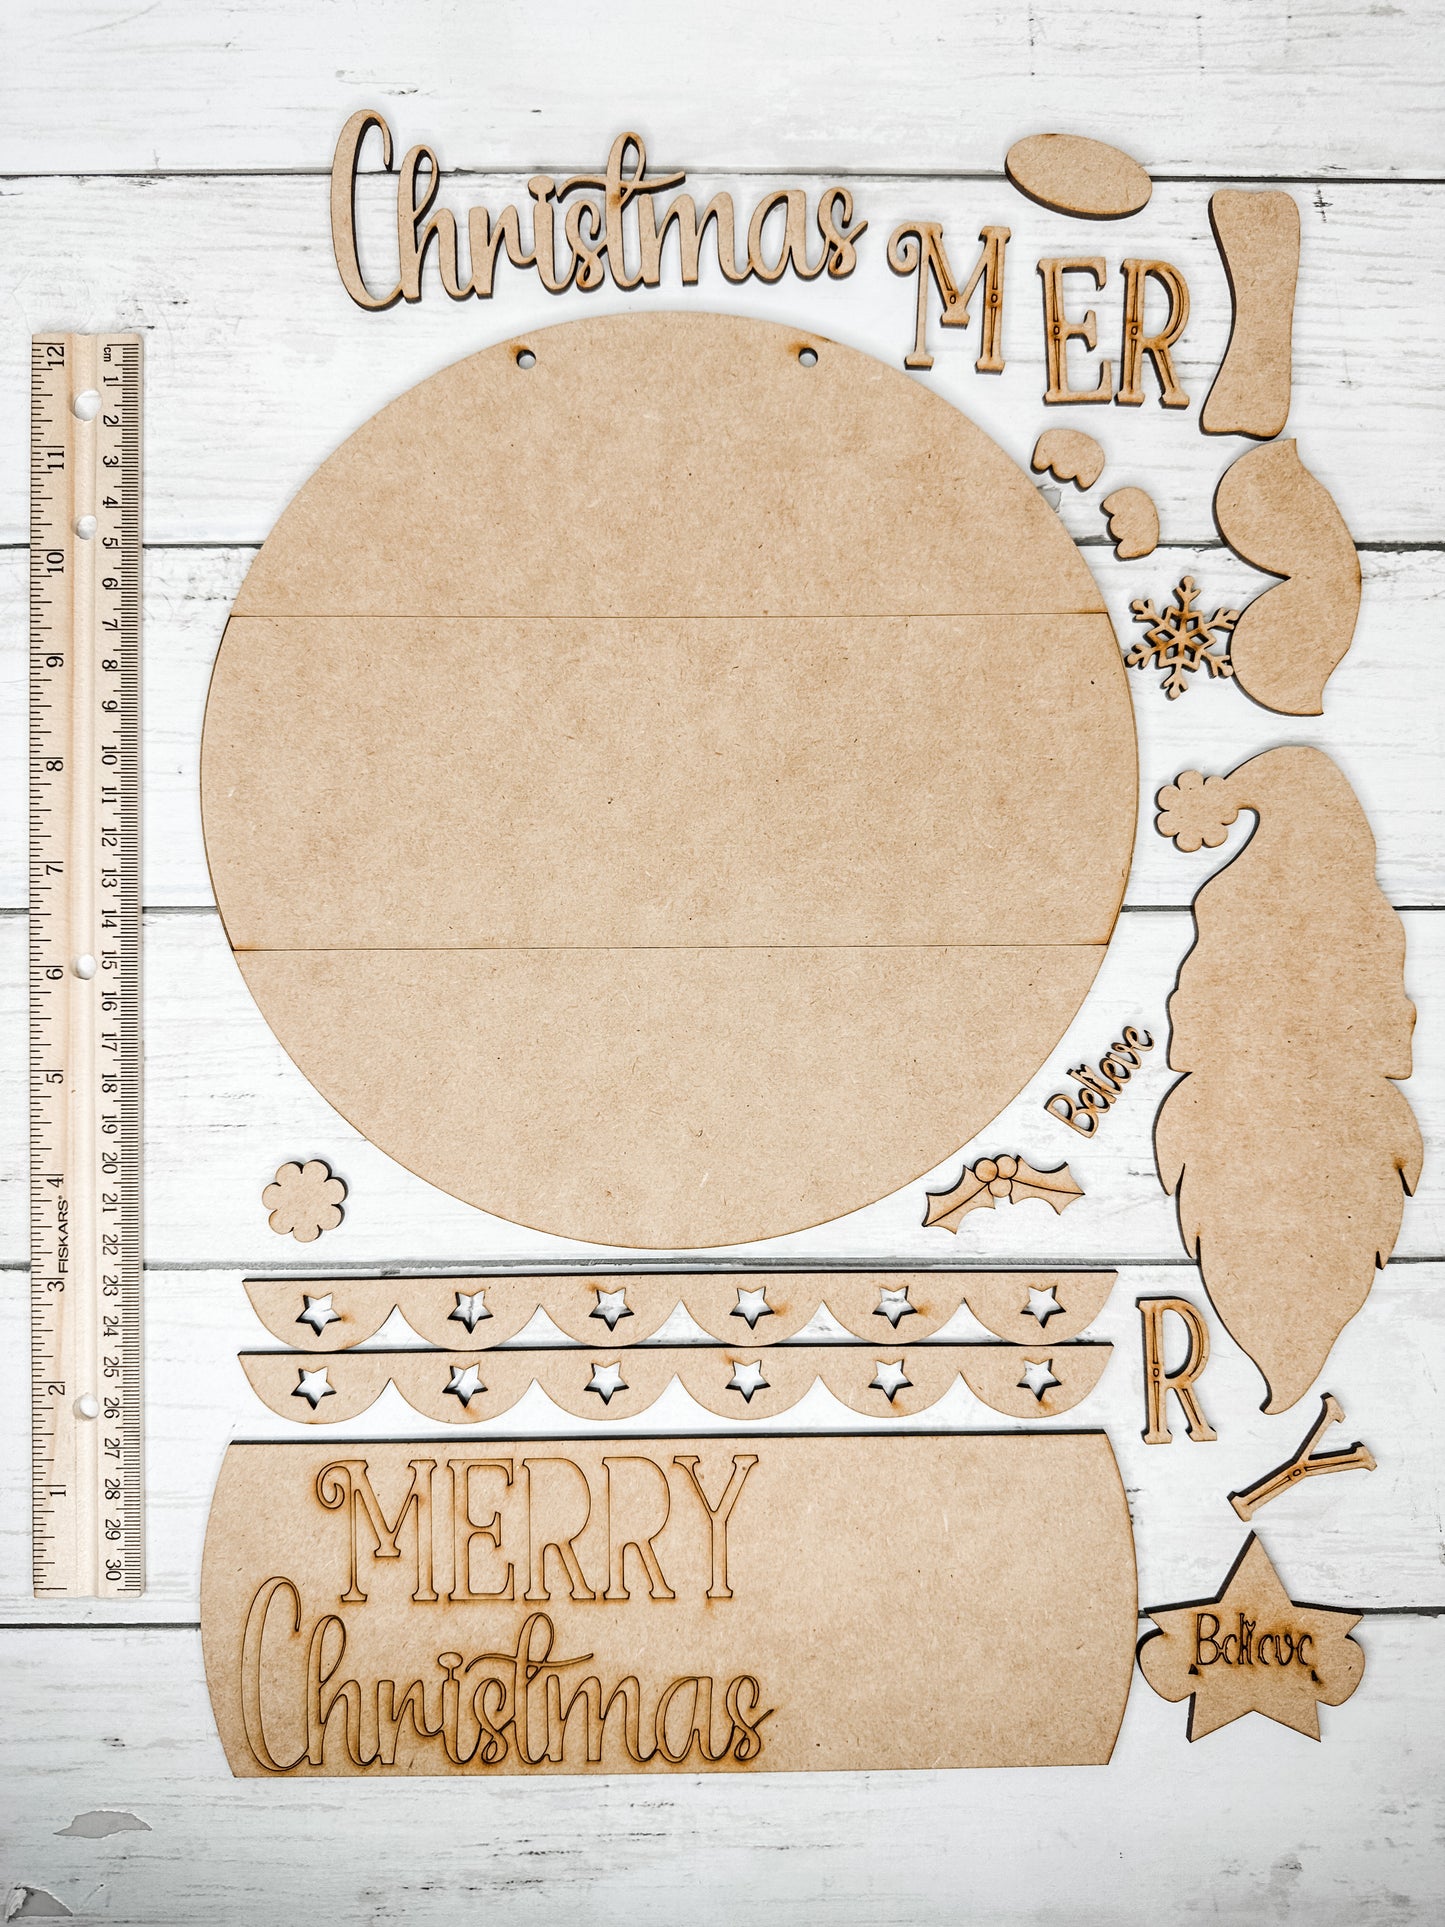 9 in round Merry Christmas Gnome Sign DIY Kit